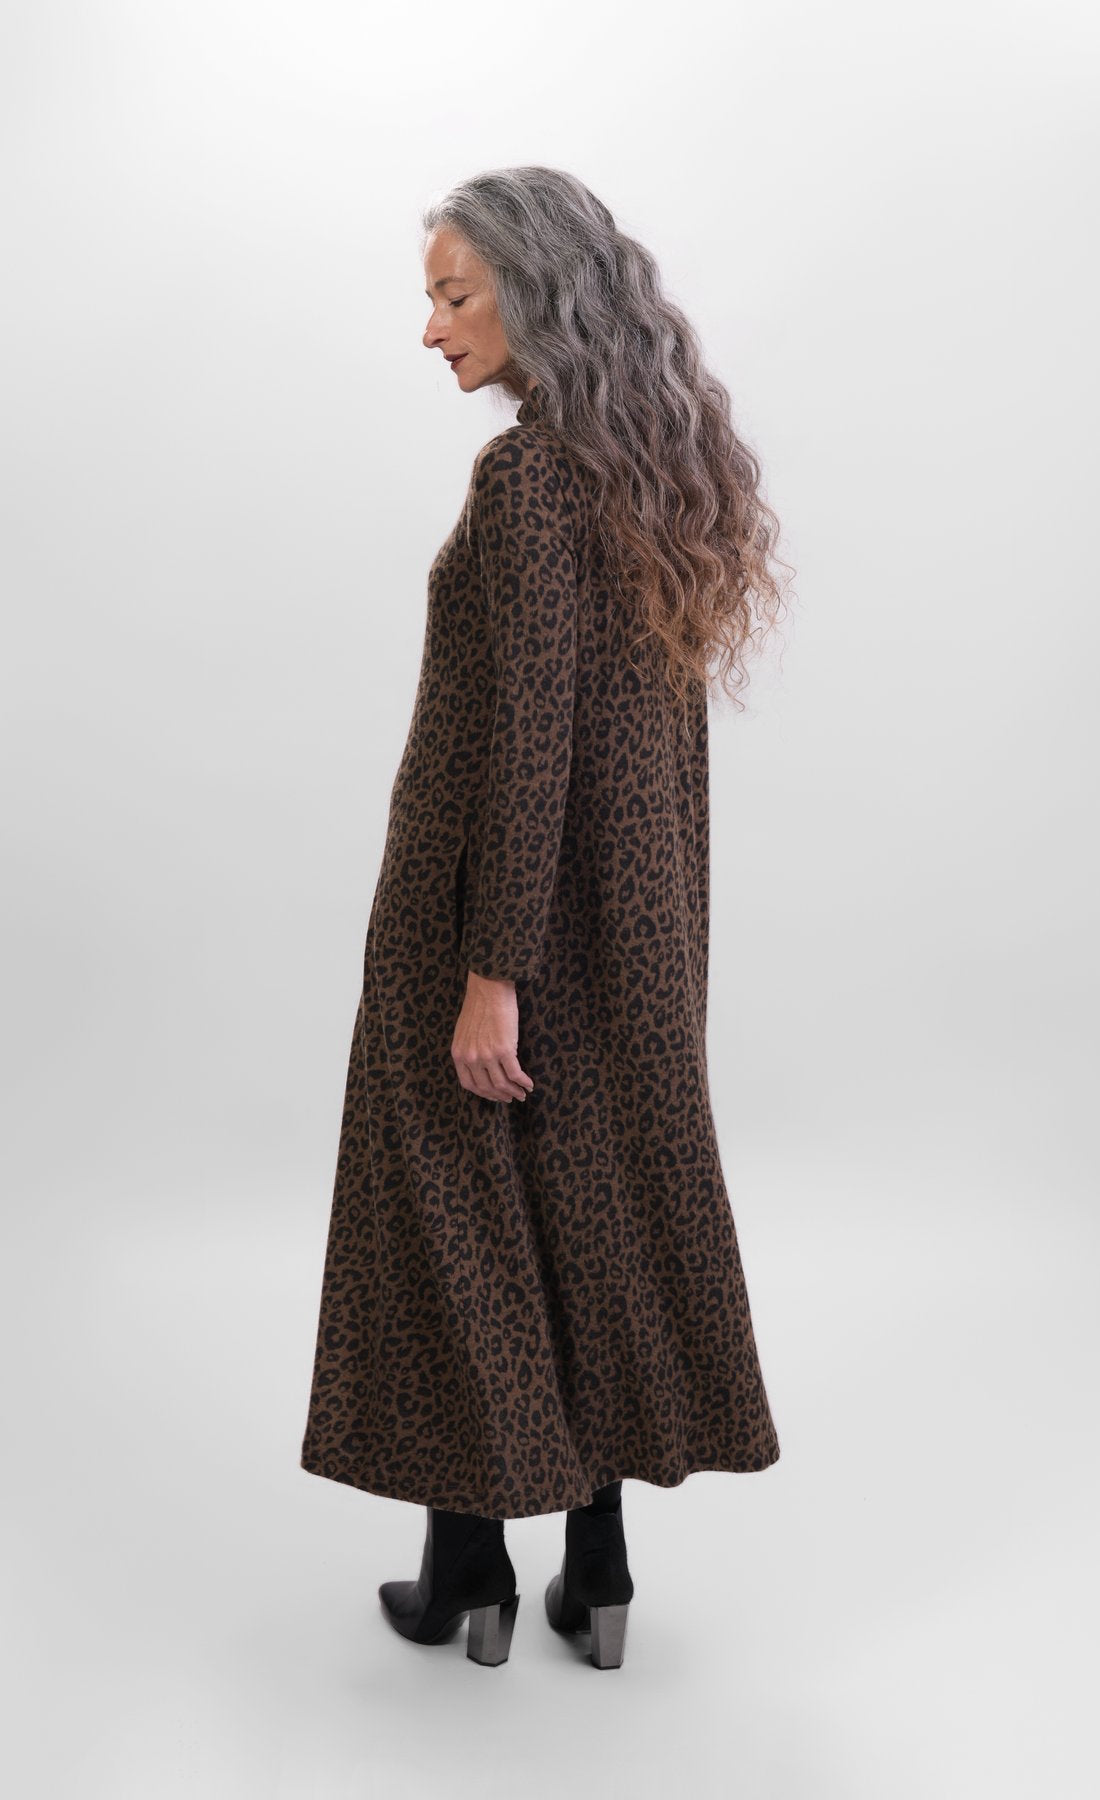 Back full body view of a woman wearing the alembika chiu swing dress. This dress is brown with black cheetah print. It has long sleeves and a turtleneck.